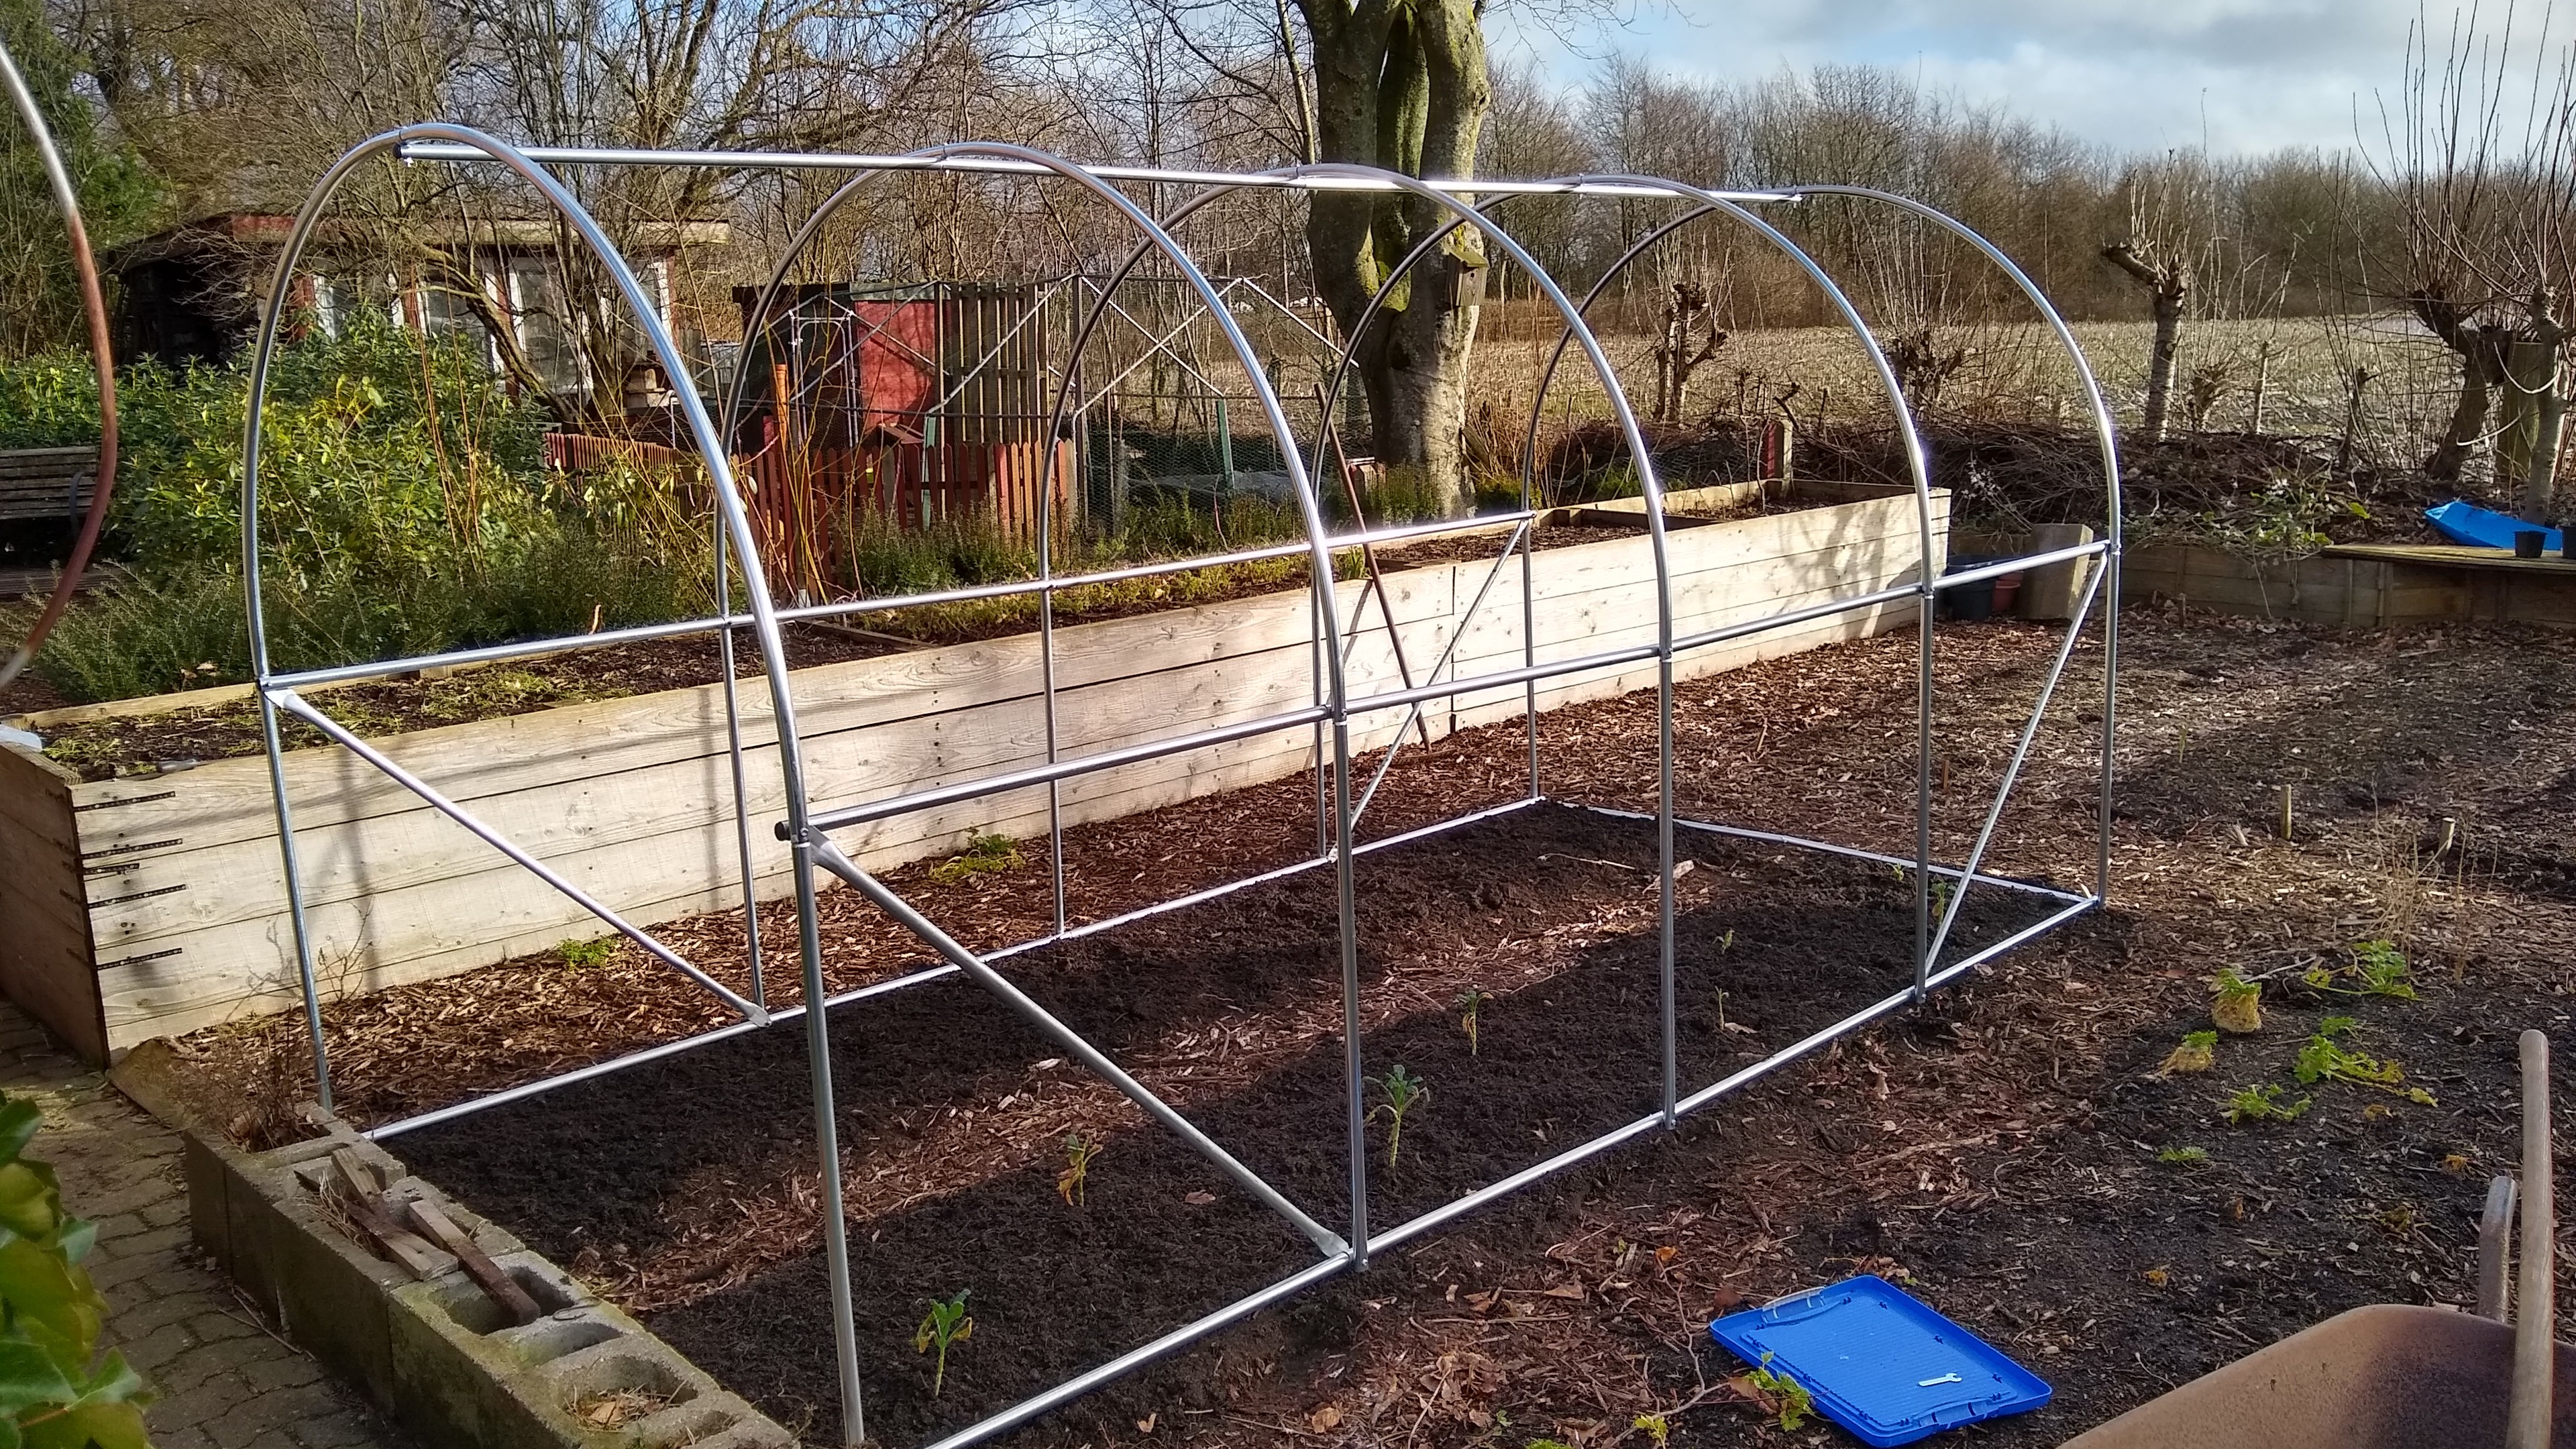 mounted metal parts of a polytunnel in a vegpatch